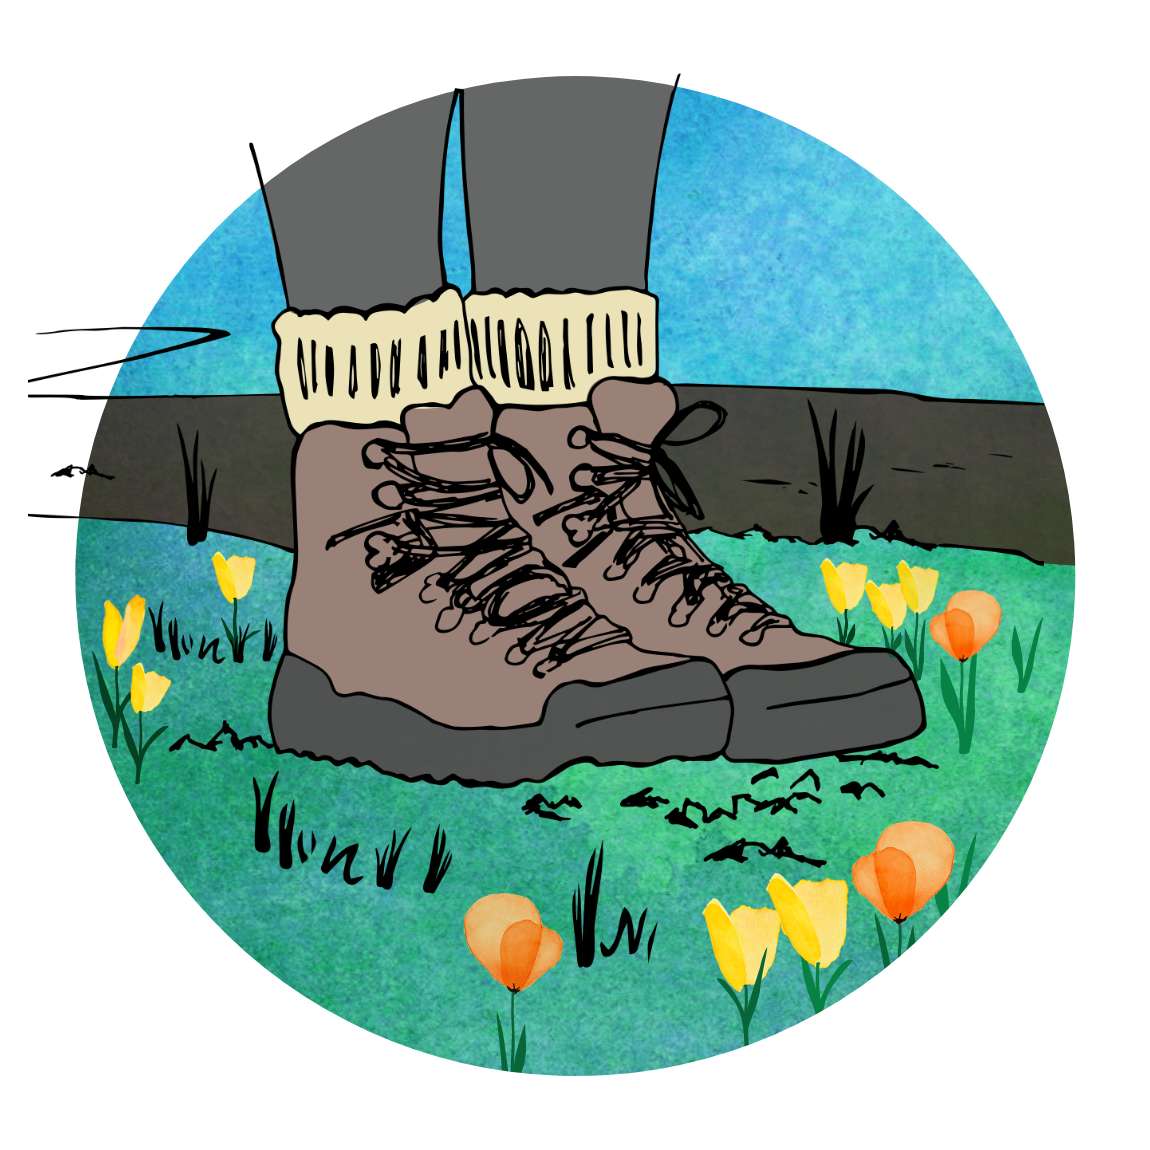 An illustration of two feet wearing well-fitted hiking boots and socks, standing firmly on a green, grassy patch surrounded by orange and yellow blossoms, against a blue background.